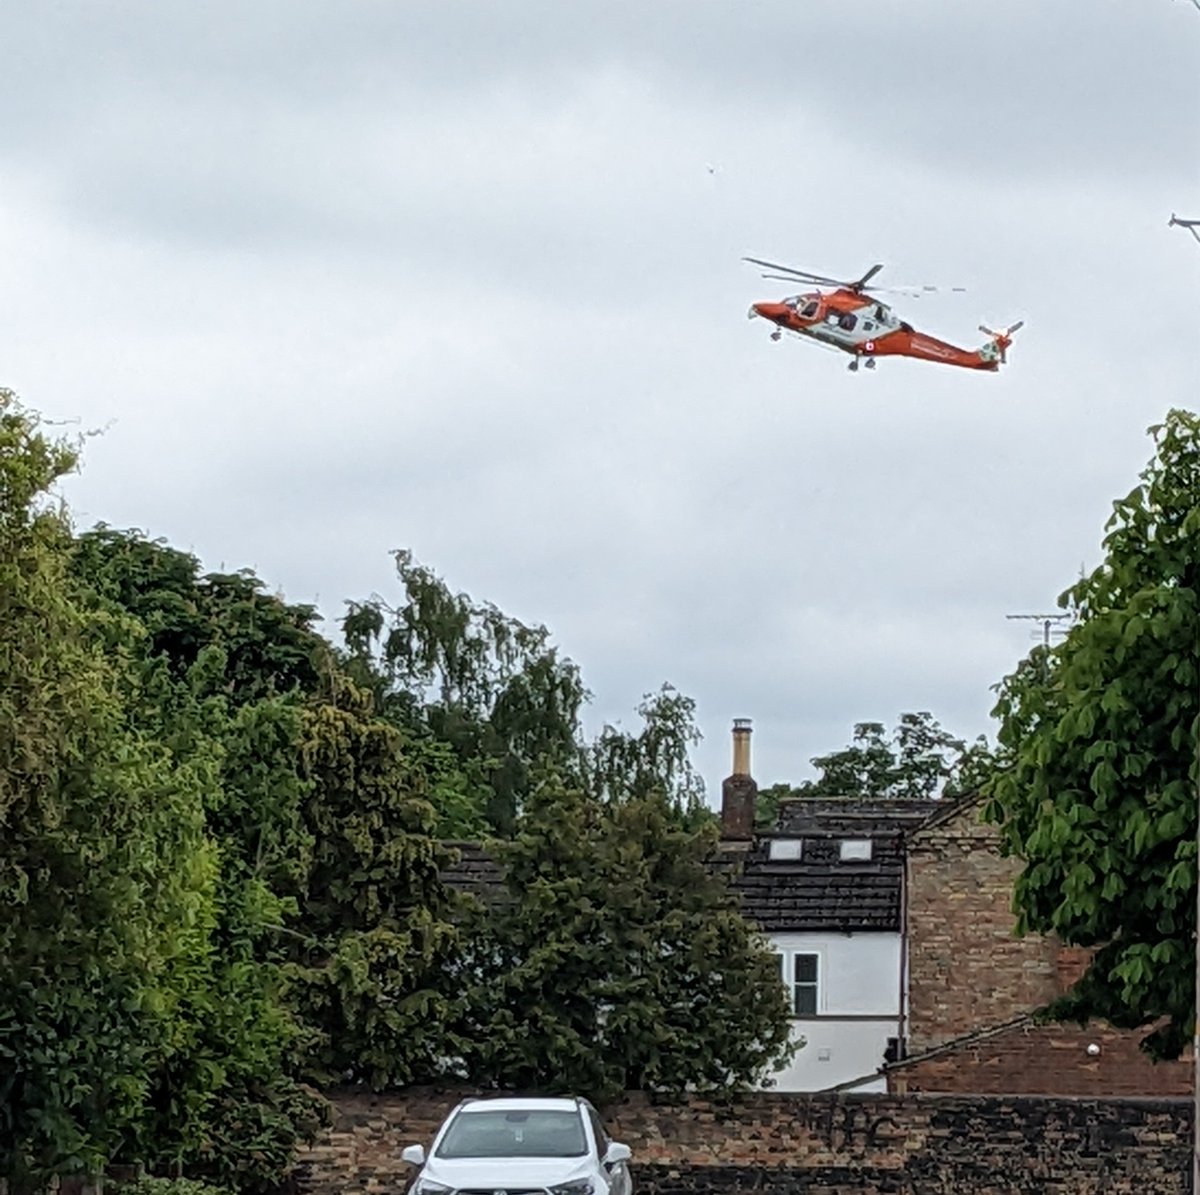 Watching the ever-incredible @Magpas_Charity coming in to land while walking the dog - good vibes to all involved in whatever emergency they're taking on today, and a reminder to all of you to support your local air ambulance!